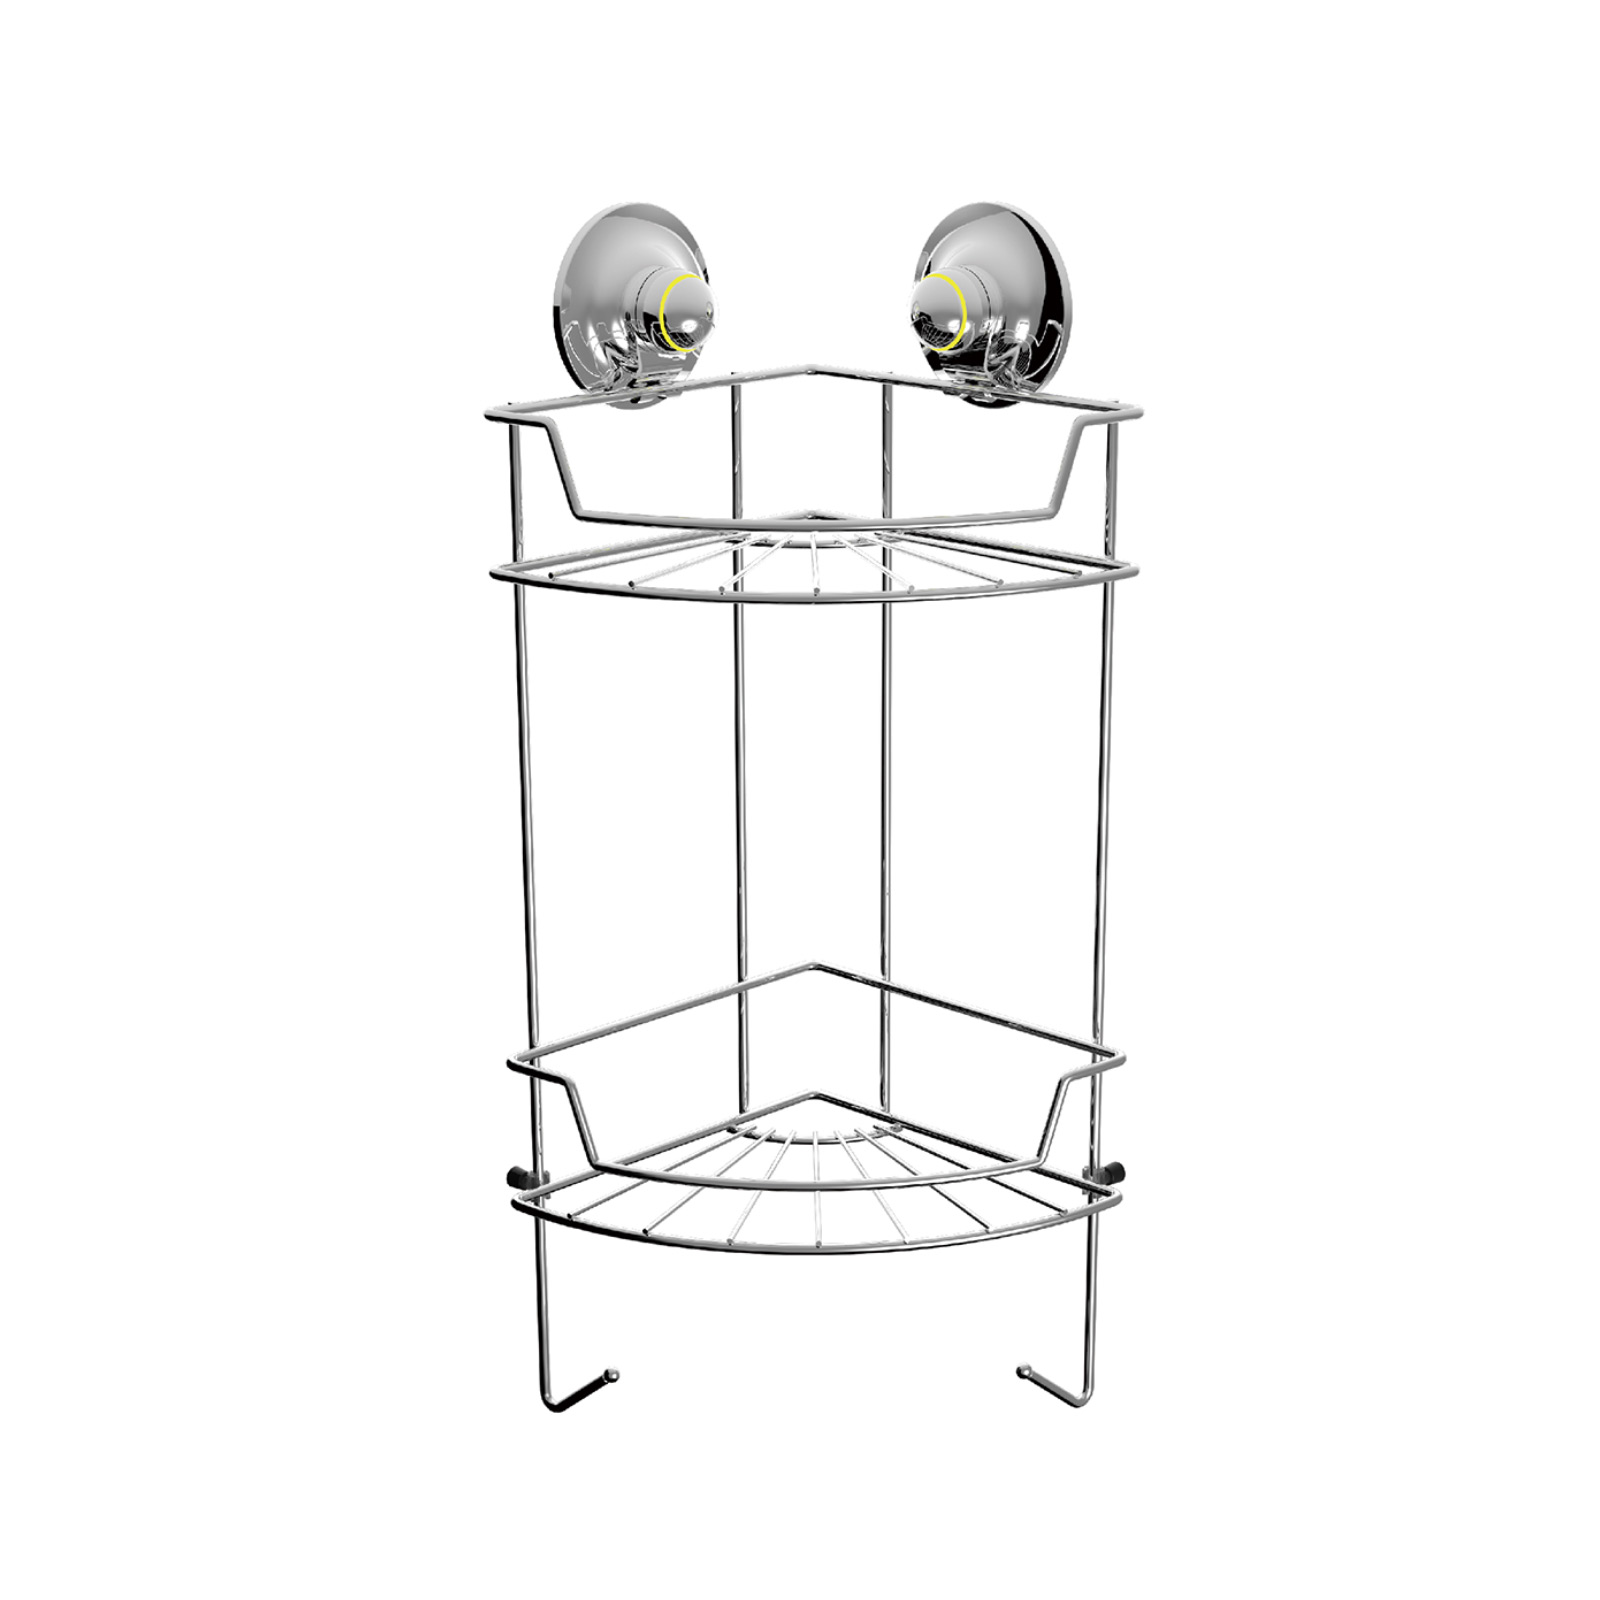 Double Corner Shelf Small - STAINLESS STEEL